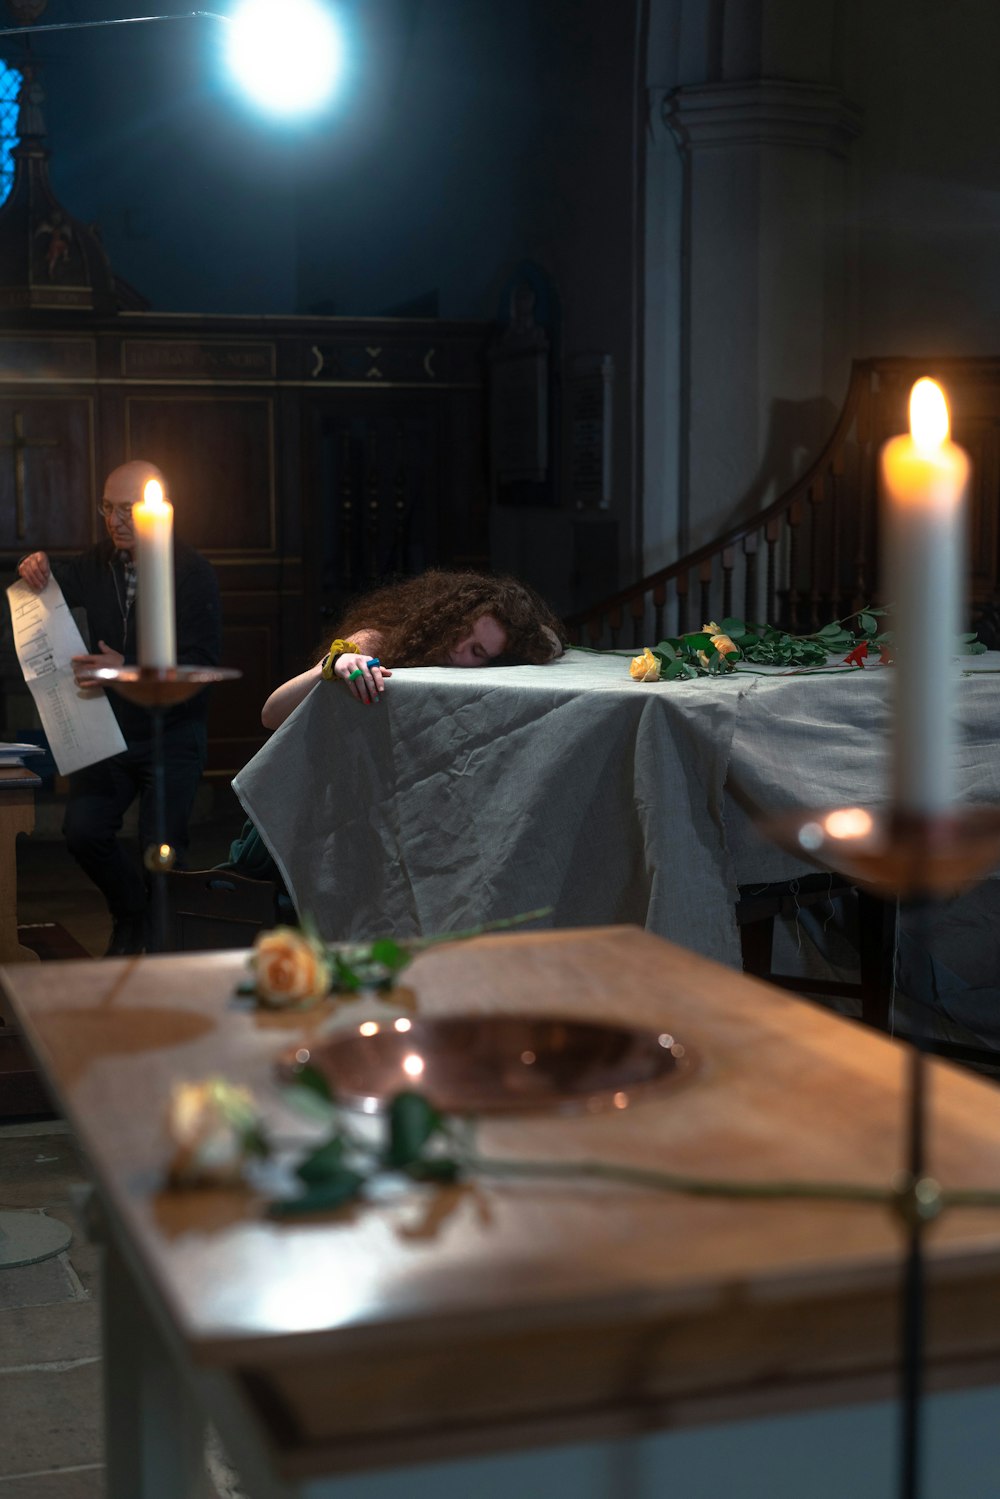 a person sleeping at a table with food and candles